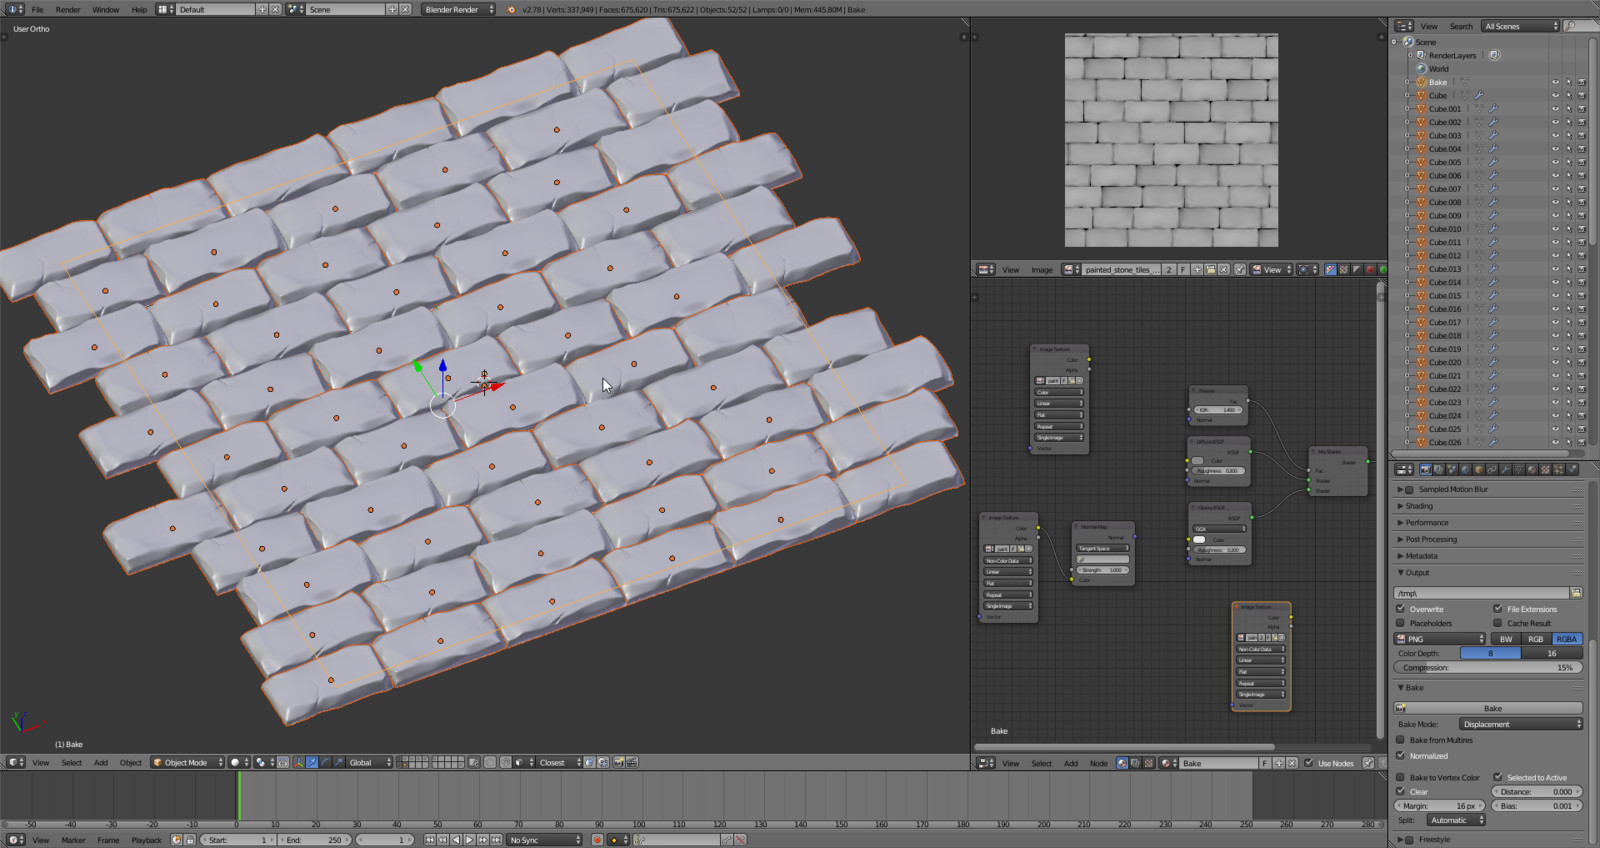 the tiles are baked high-poly 3d models